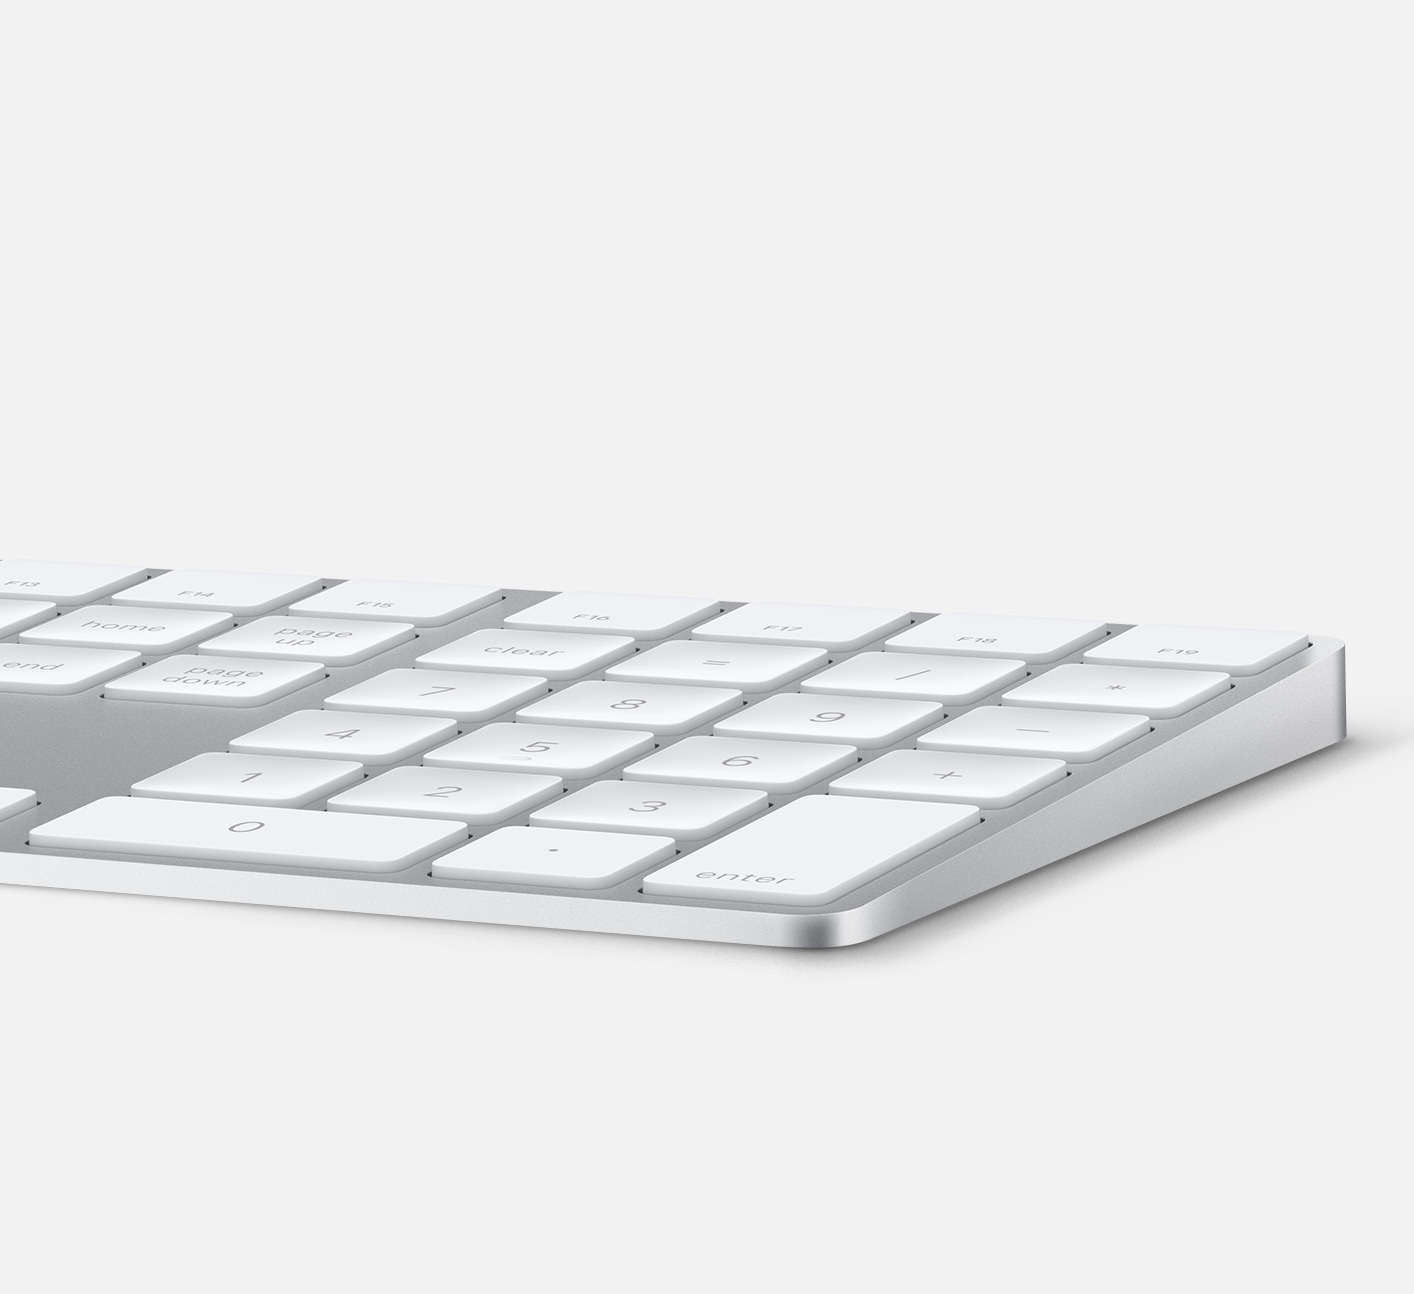 Marketing rendering showing an isometric view of the num pad section of Apple's eternal Magic Keyboard